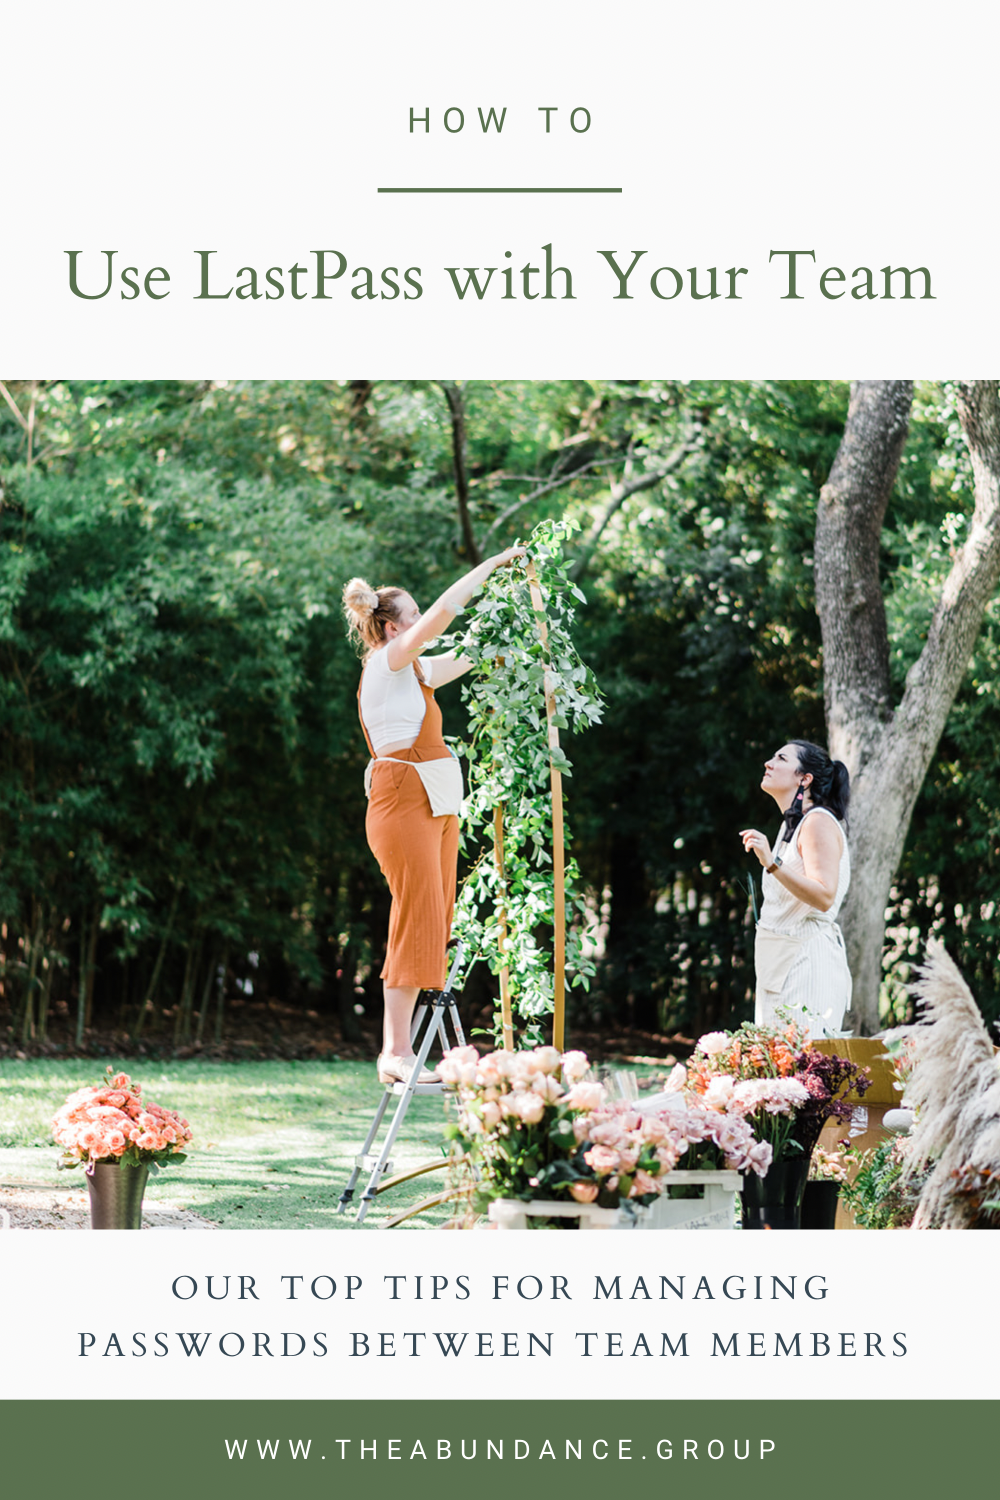 How to Use LastPass with Your Team